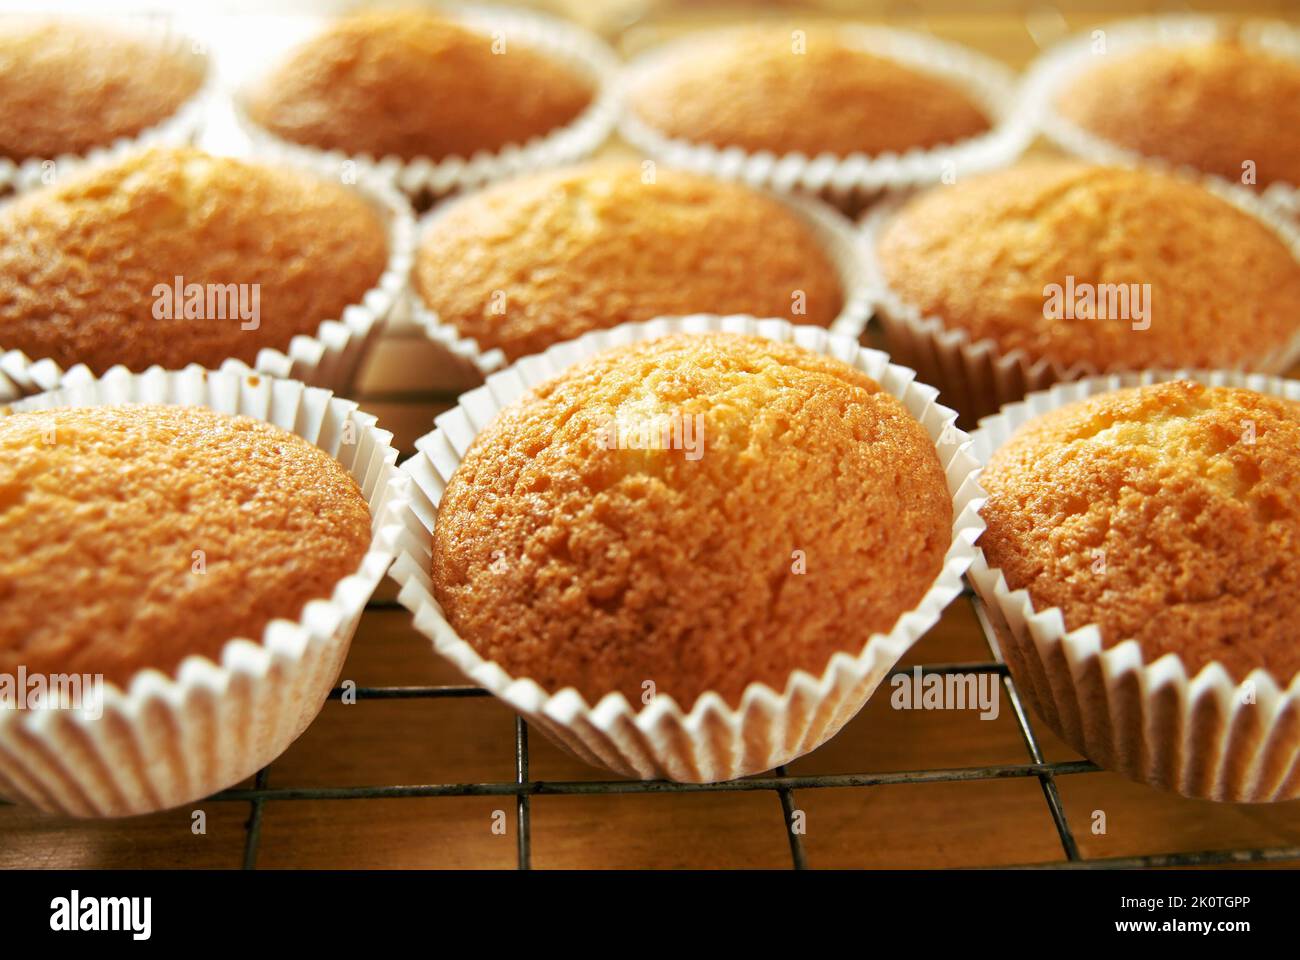 Freshly baked cupcakes on a cooling tray Stock Photo